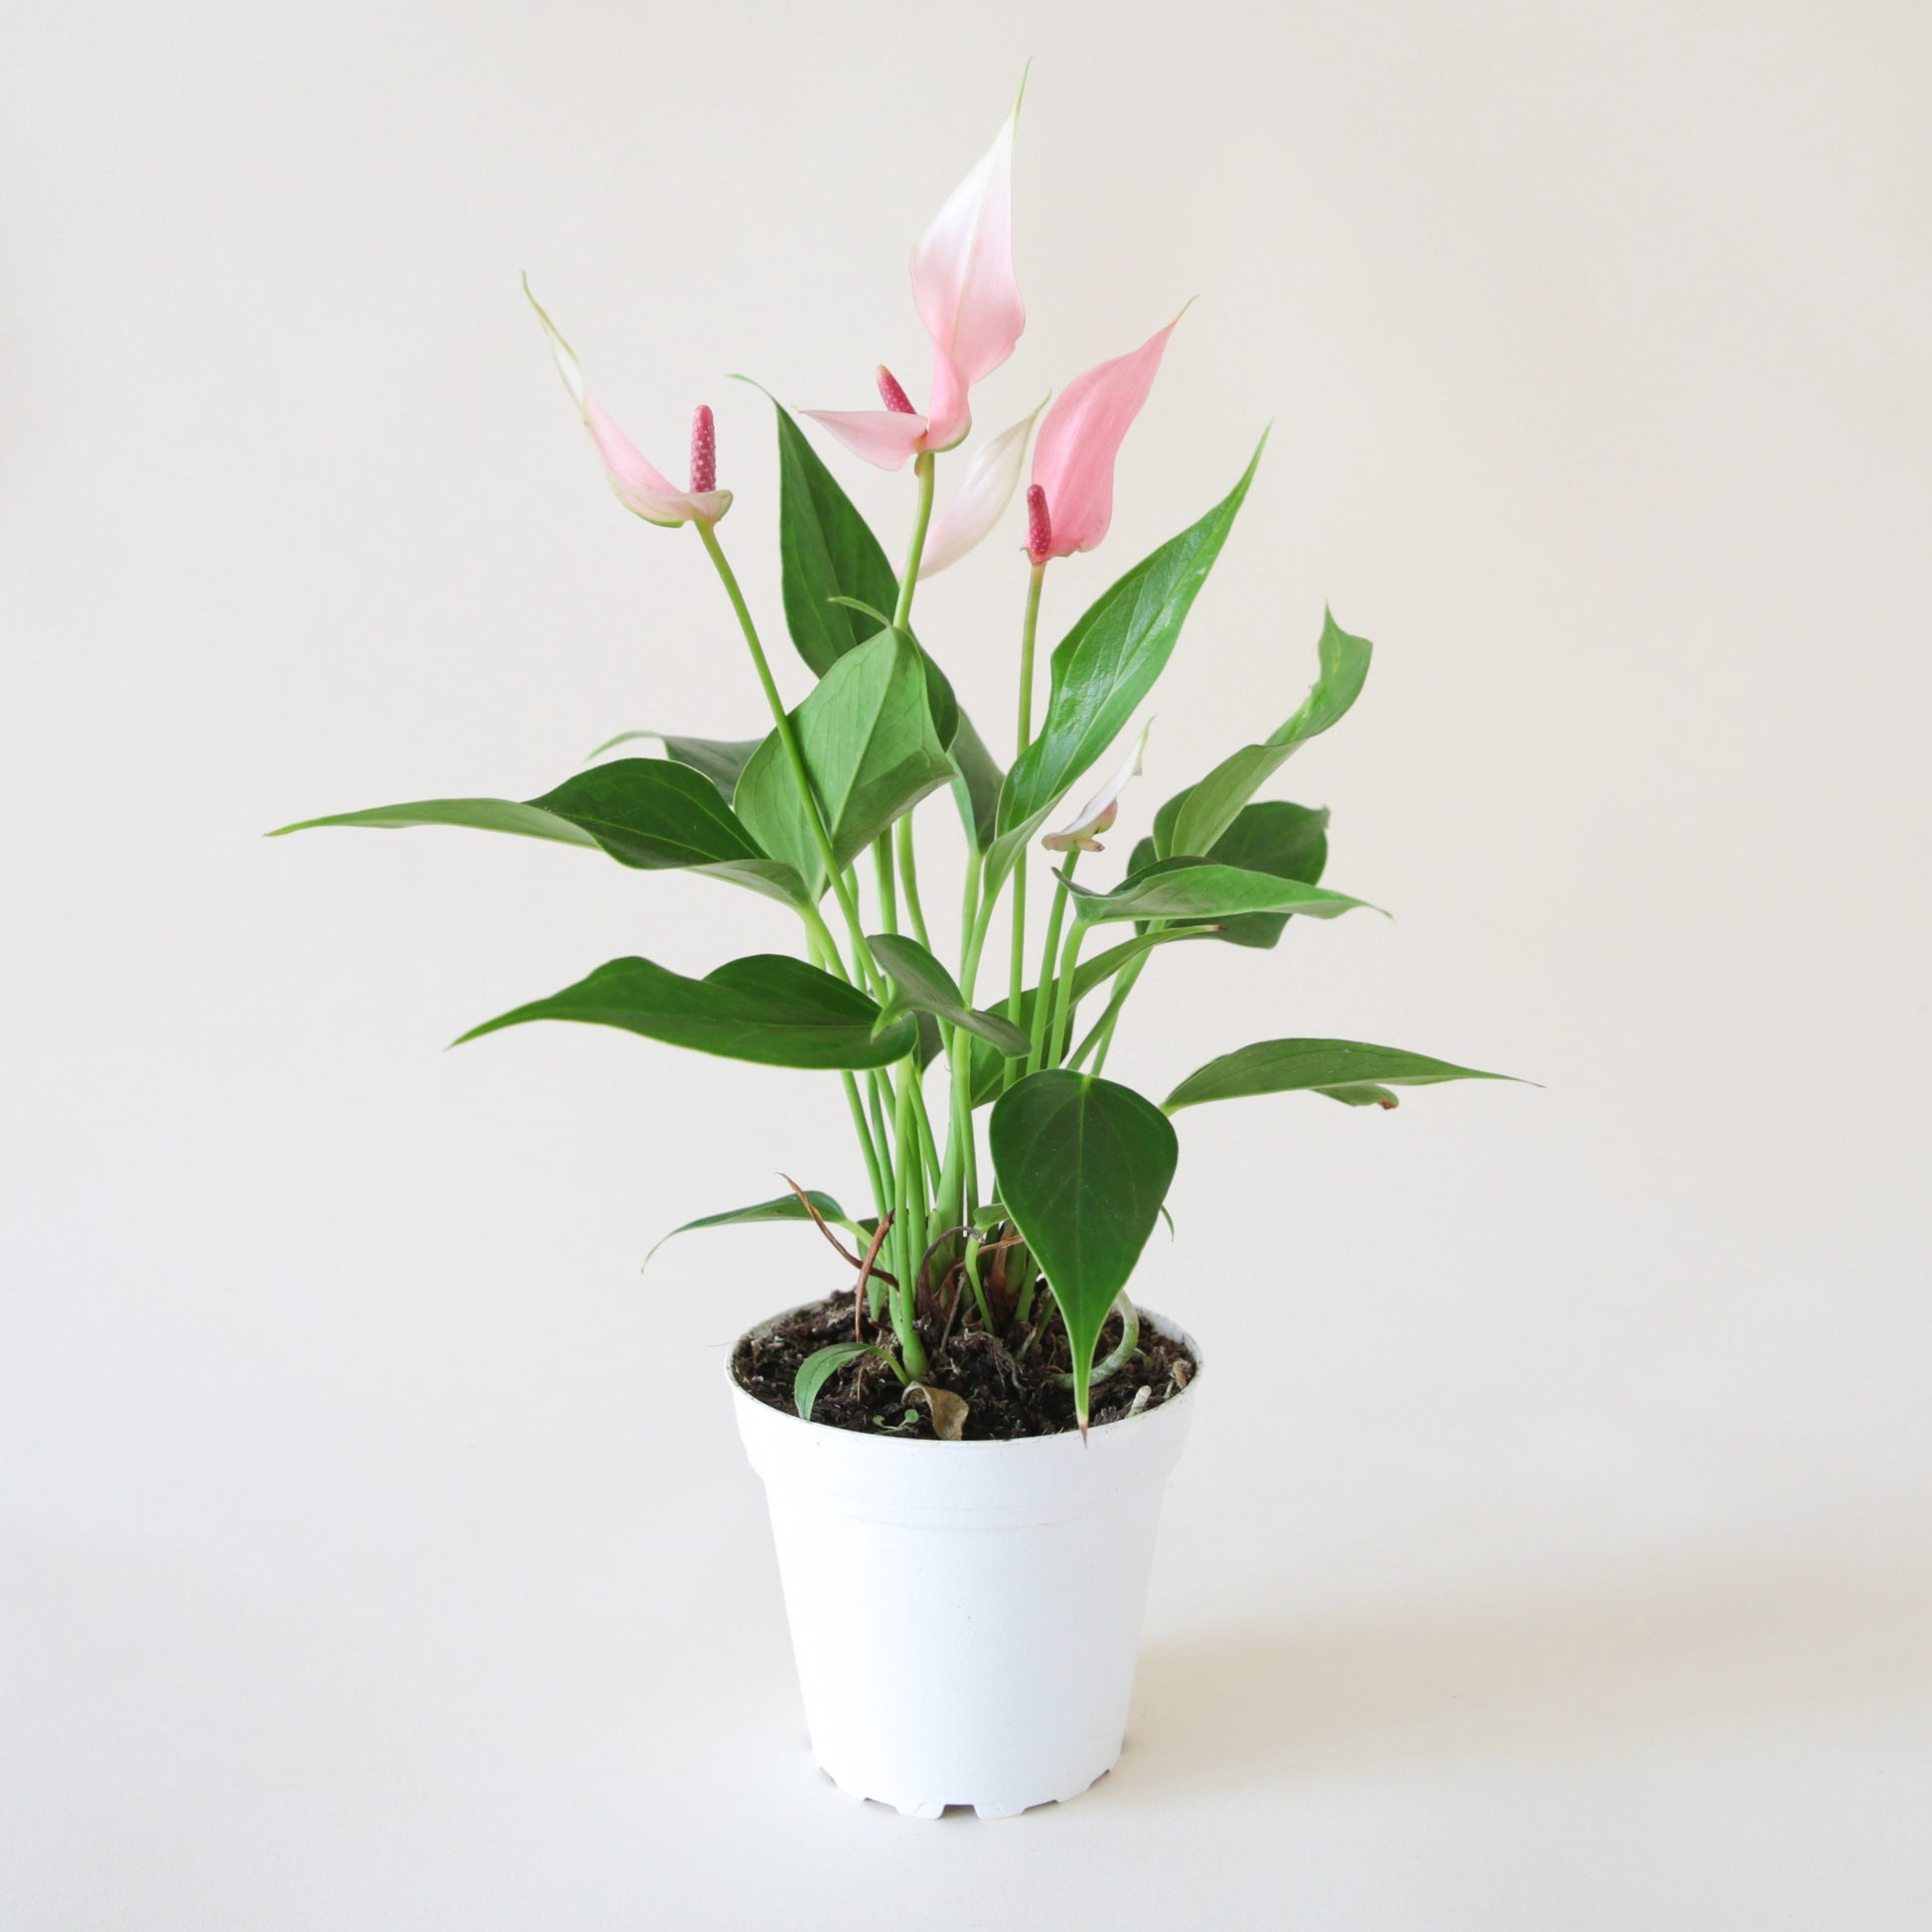 Anthurium "Lilli" Light Pink in a round white pot. Anthurium is a green leafy plant with tall bright pink arrowhead shape flowers and dark pink stamen.